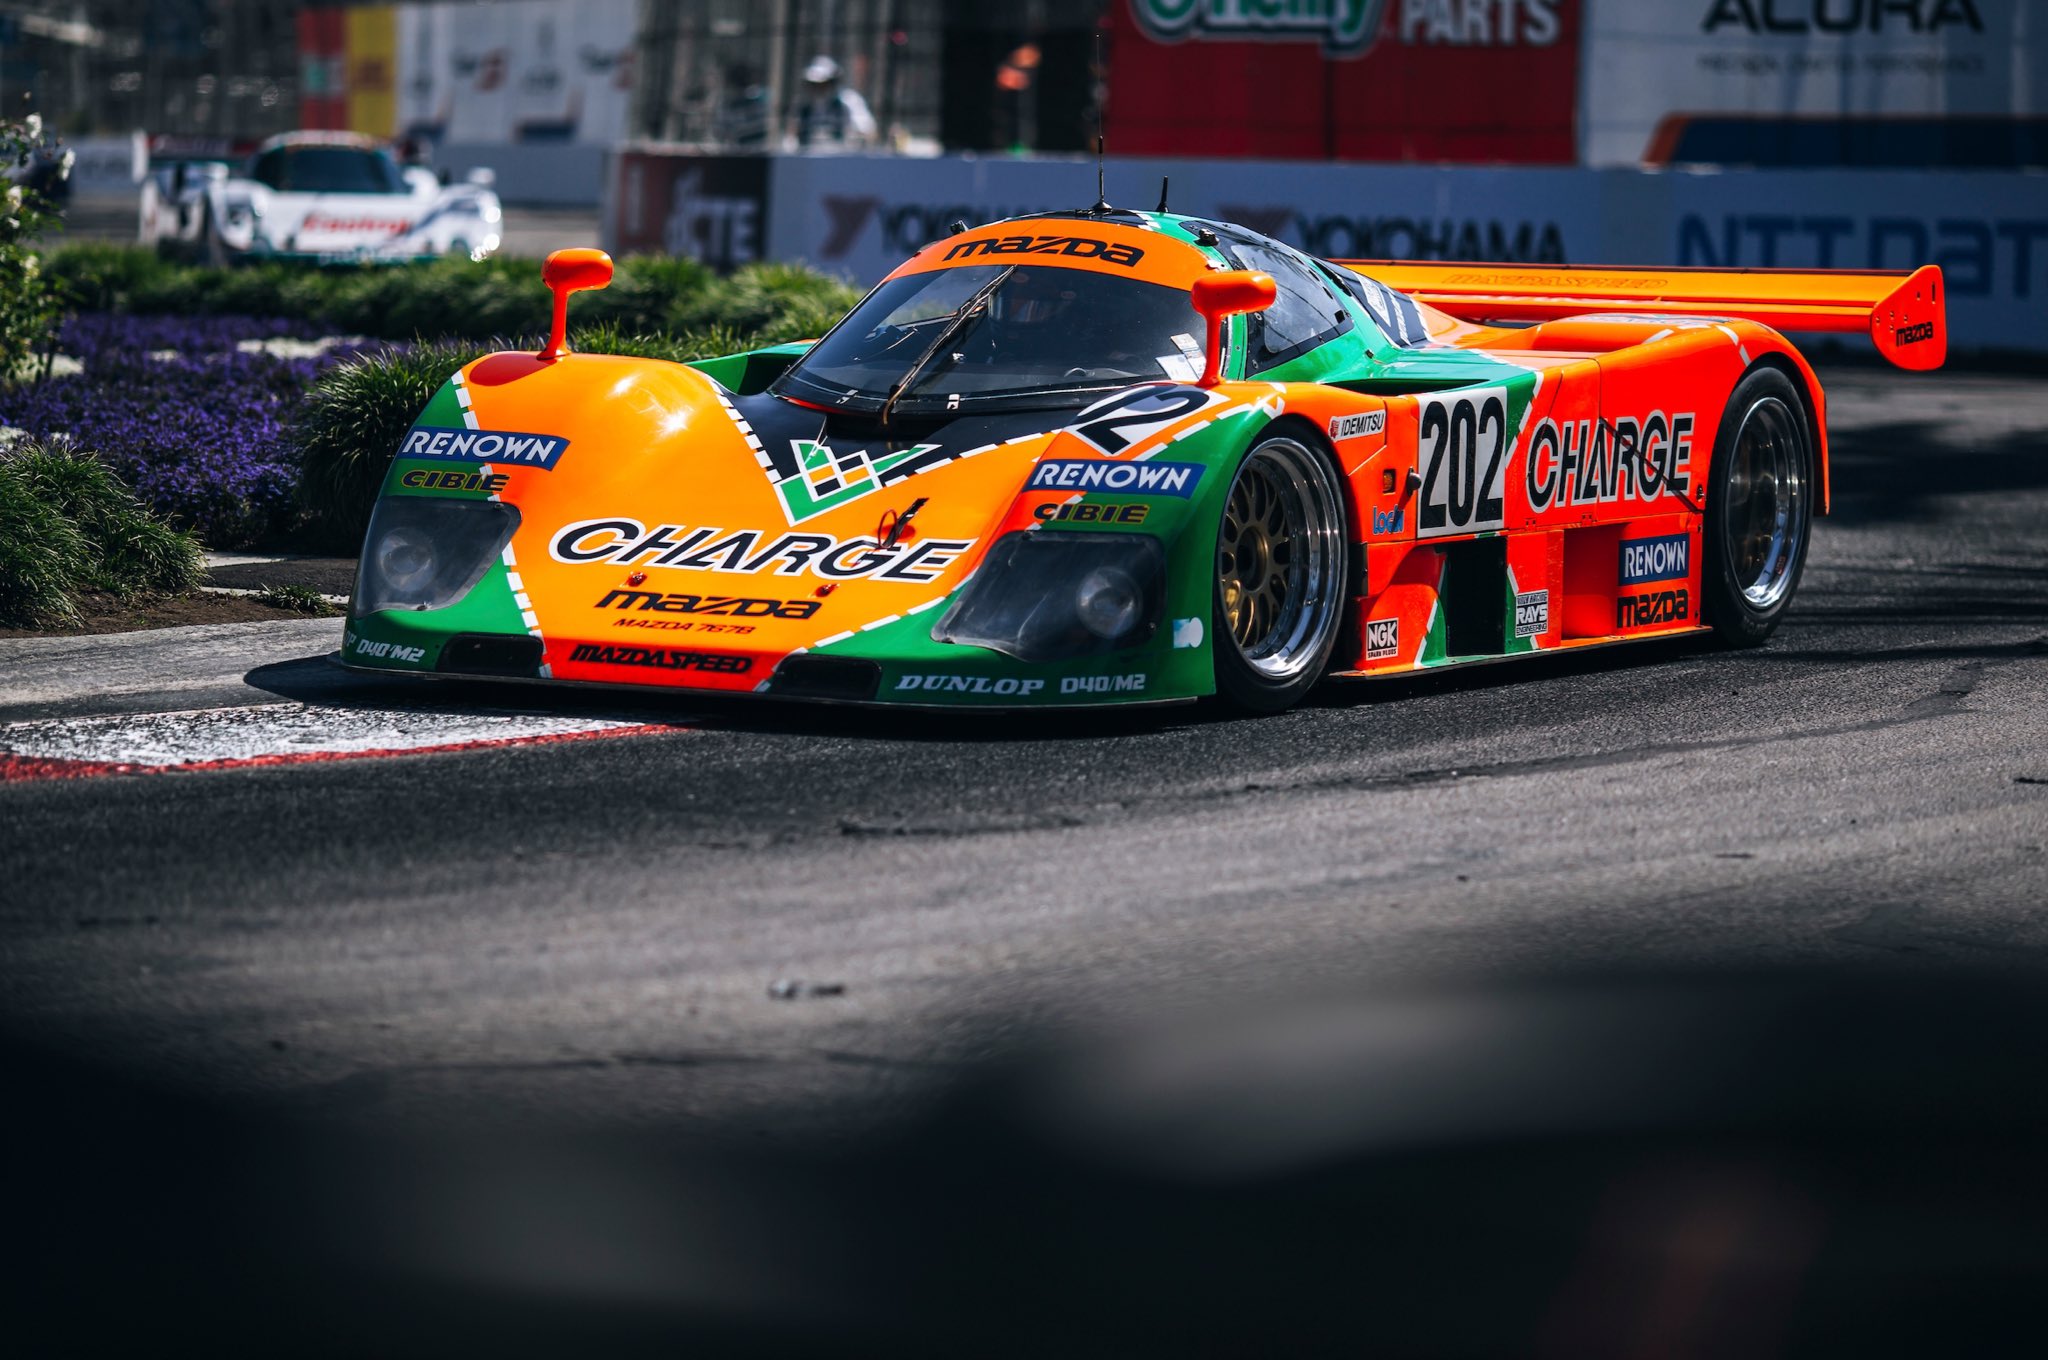 The 767 and 787 were both part of Mazdas GTP heritage and vintage race offering from the Long Beach weekend.